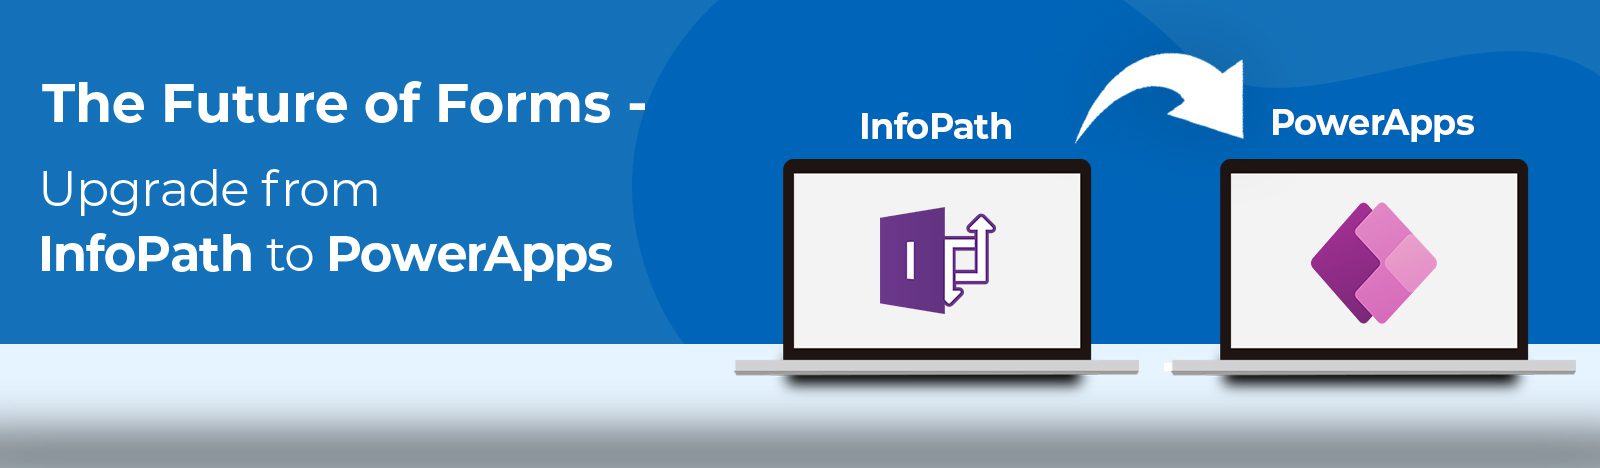 The Future of Forms: Upgrade from InfoPath to PowerApps